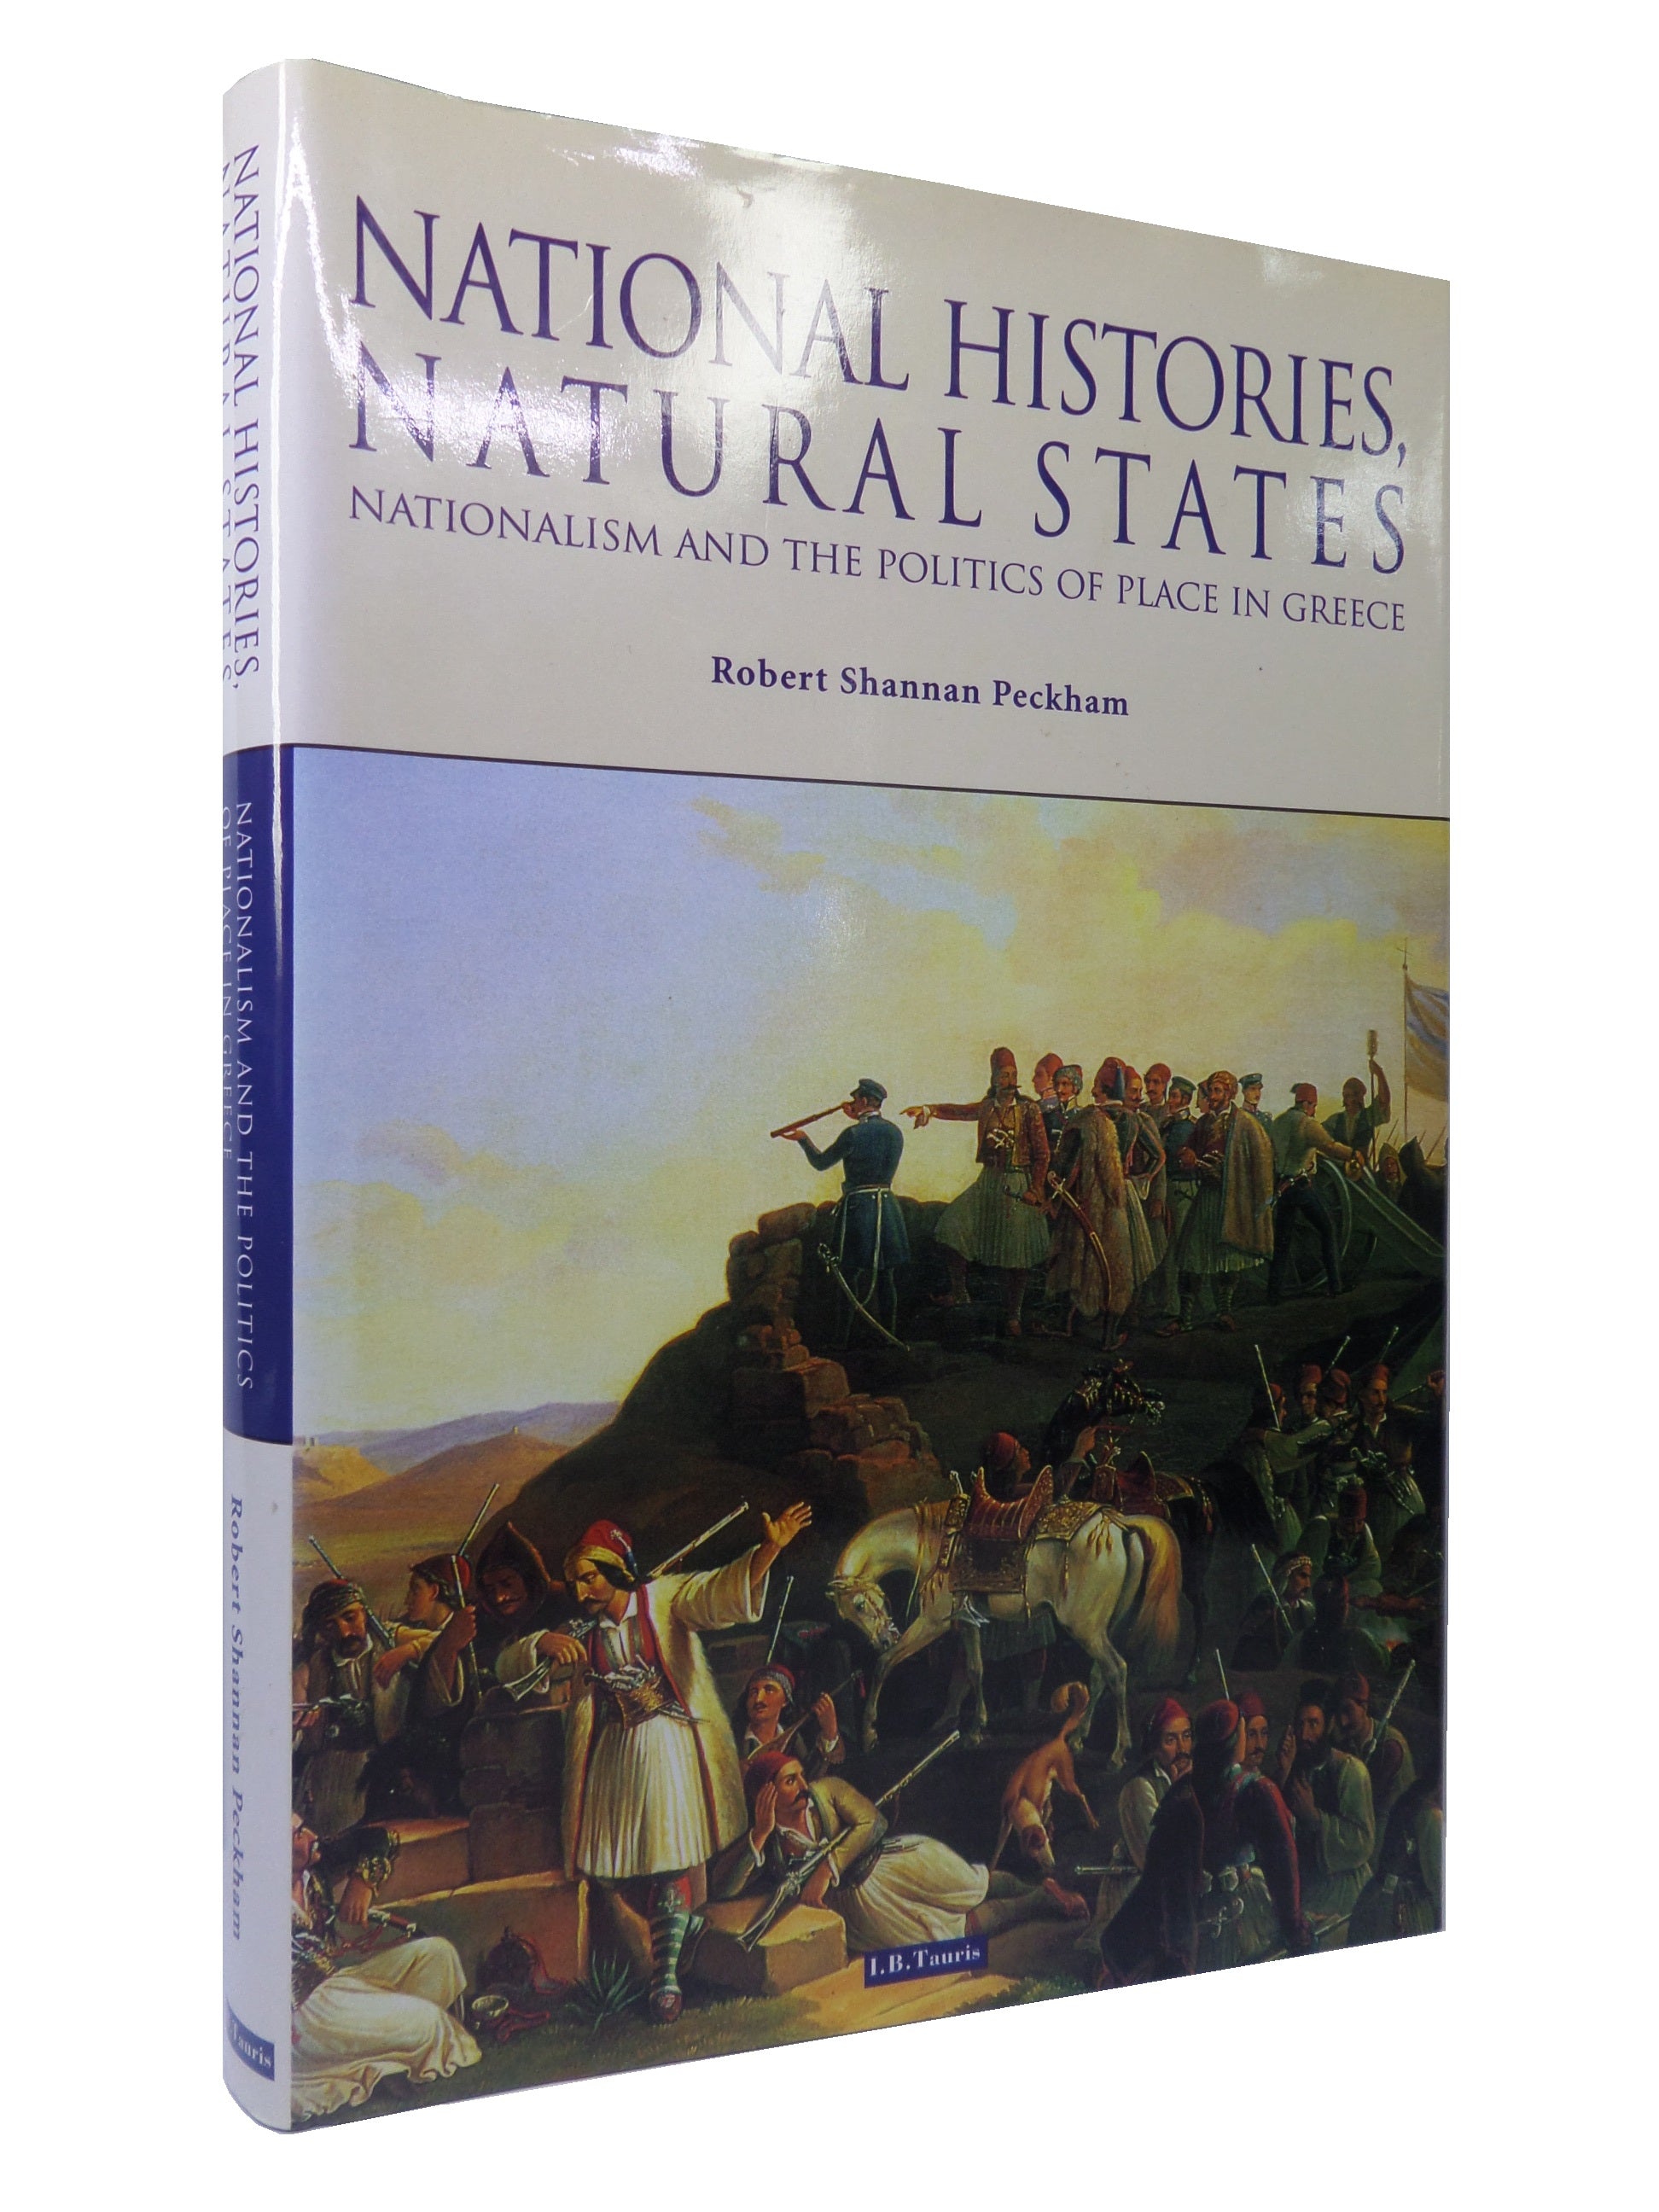 NATIONAL HISTORIES, NATURAL STATES - GREECE BY ROBERT PECKHAM 2001 HARDCOVER